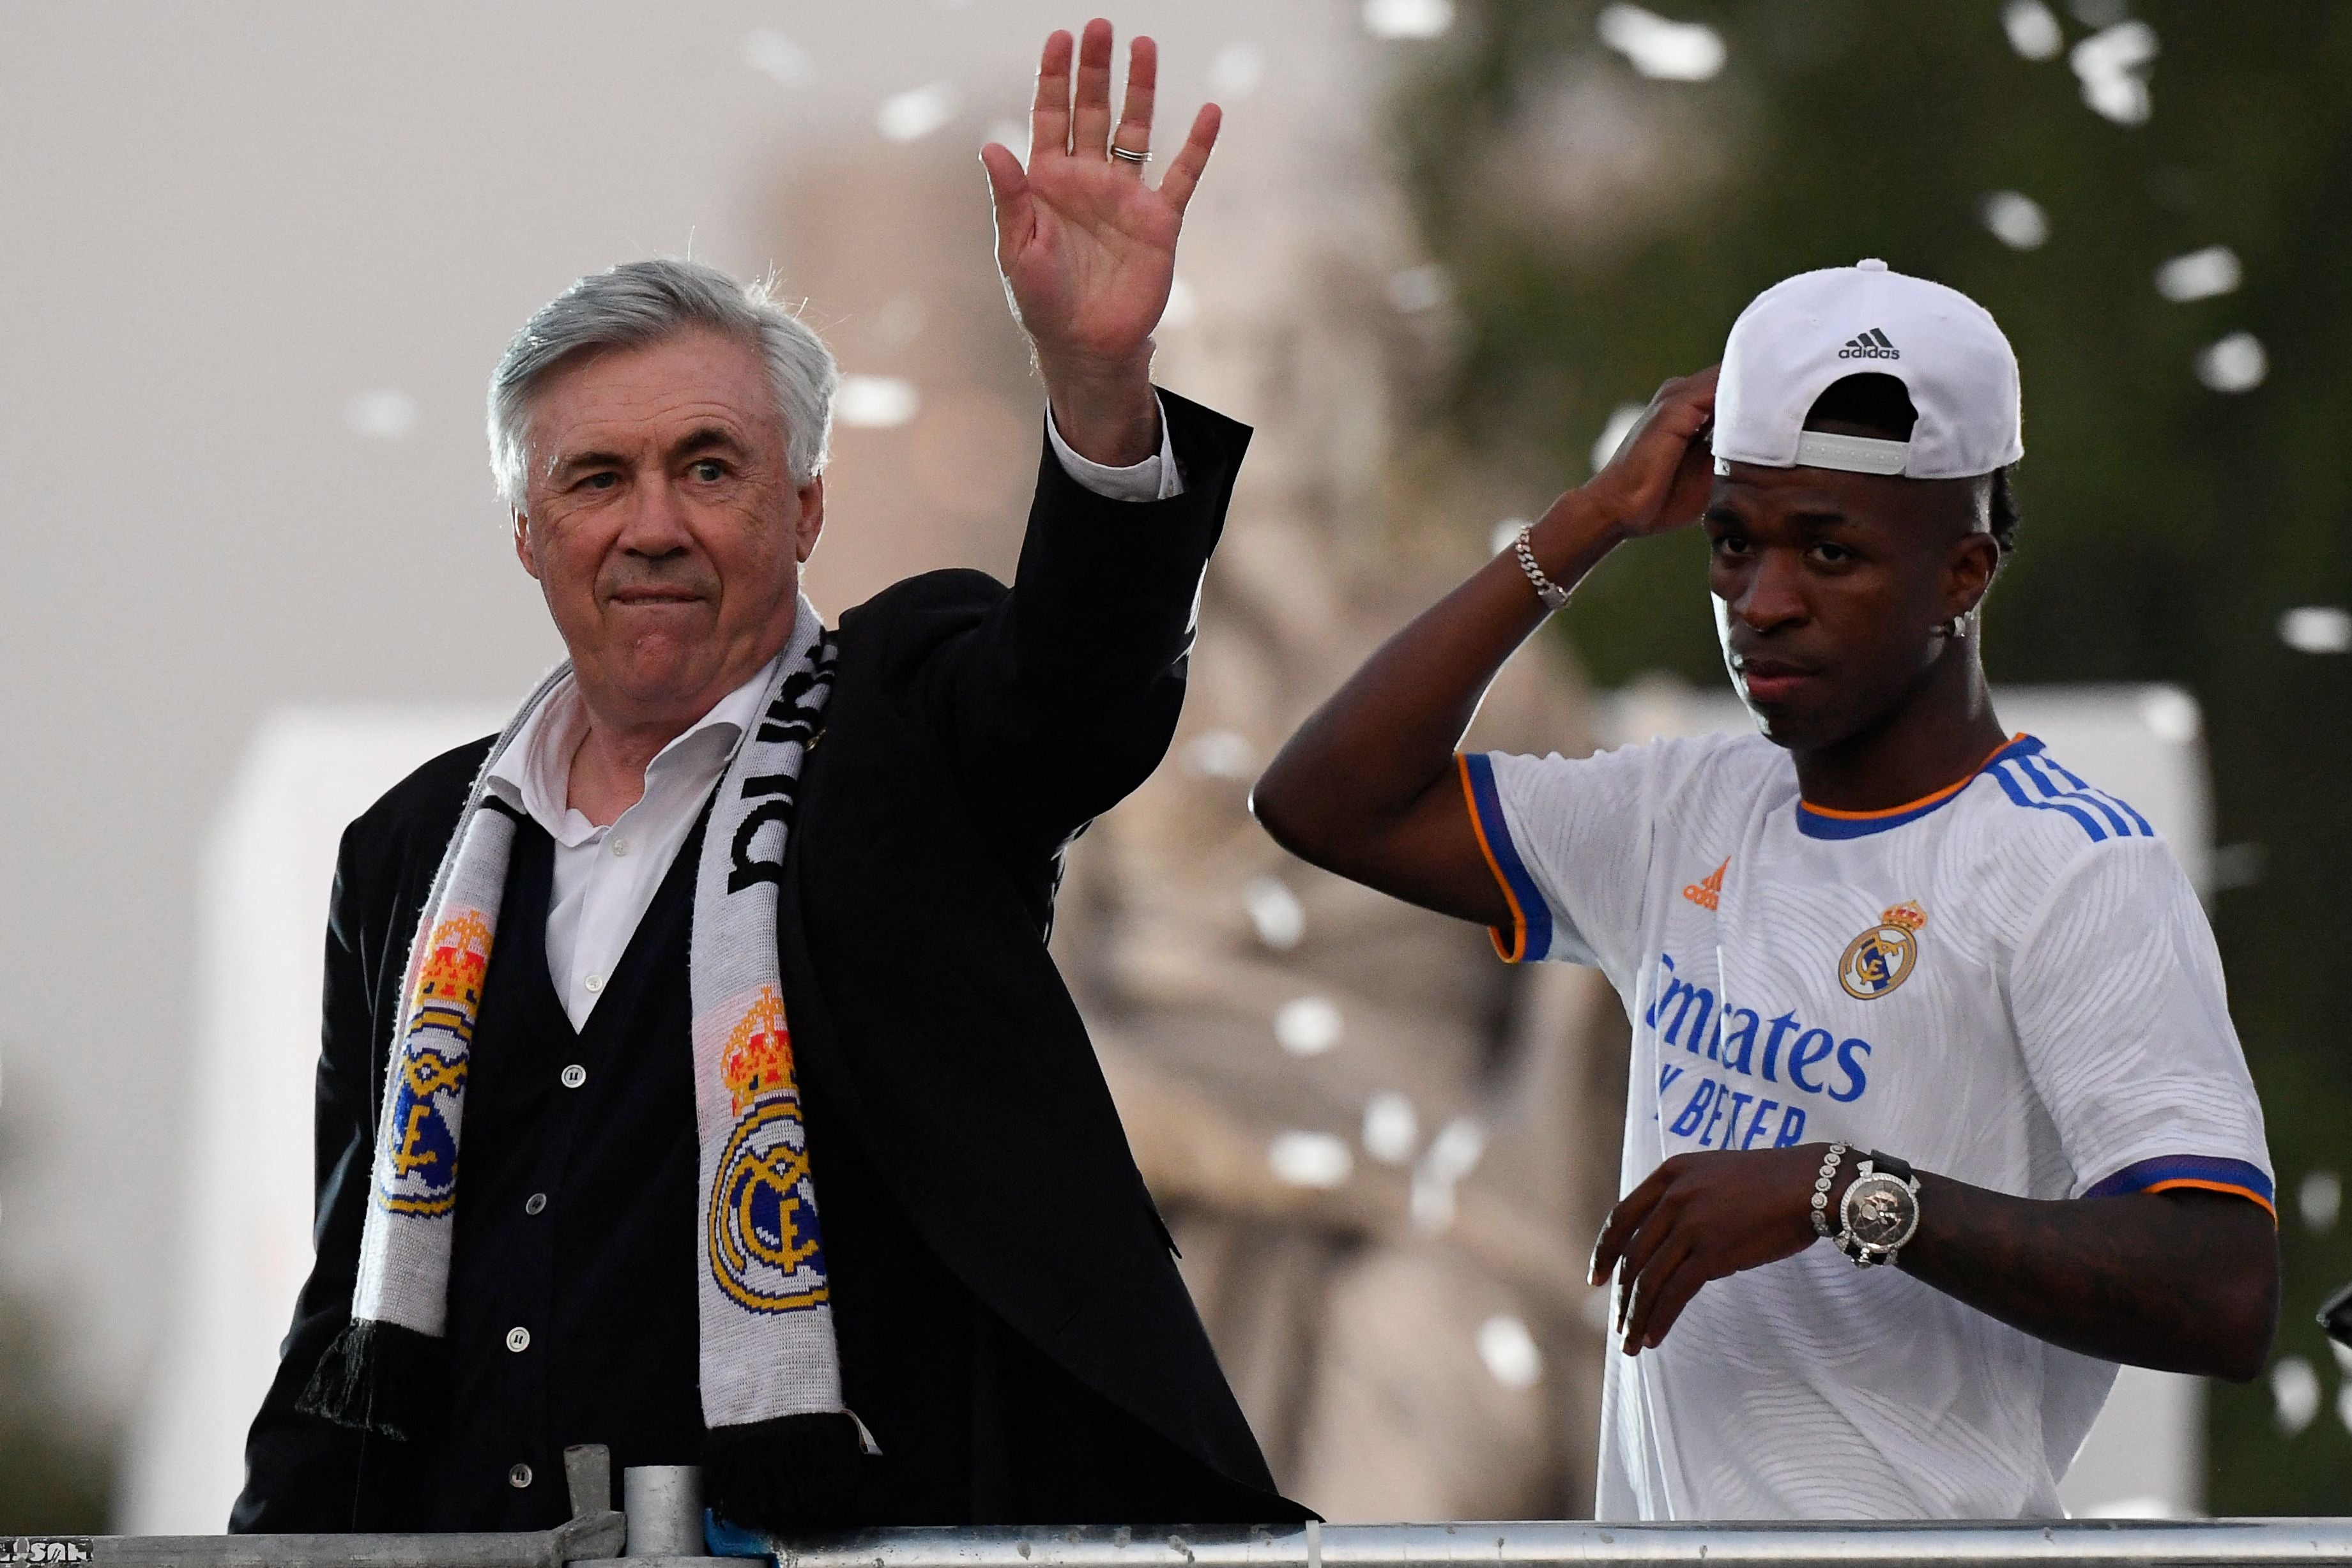 Carlo Ancelotti (left) has guided Real Madrid to his first La Liga title